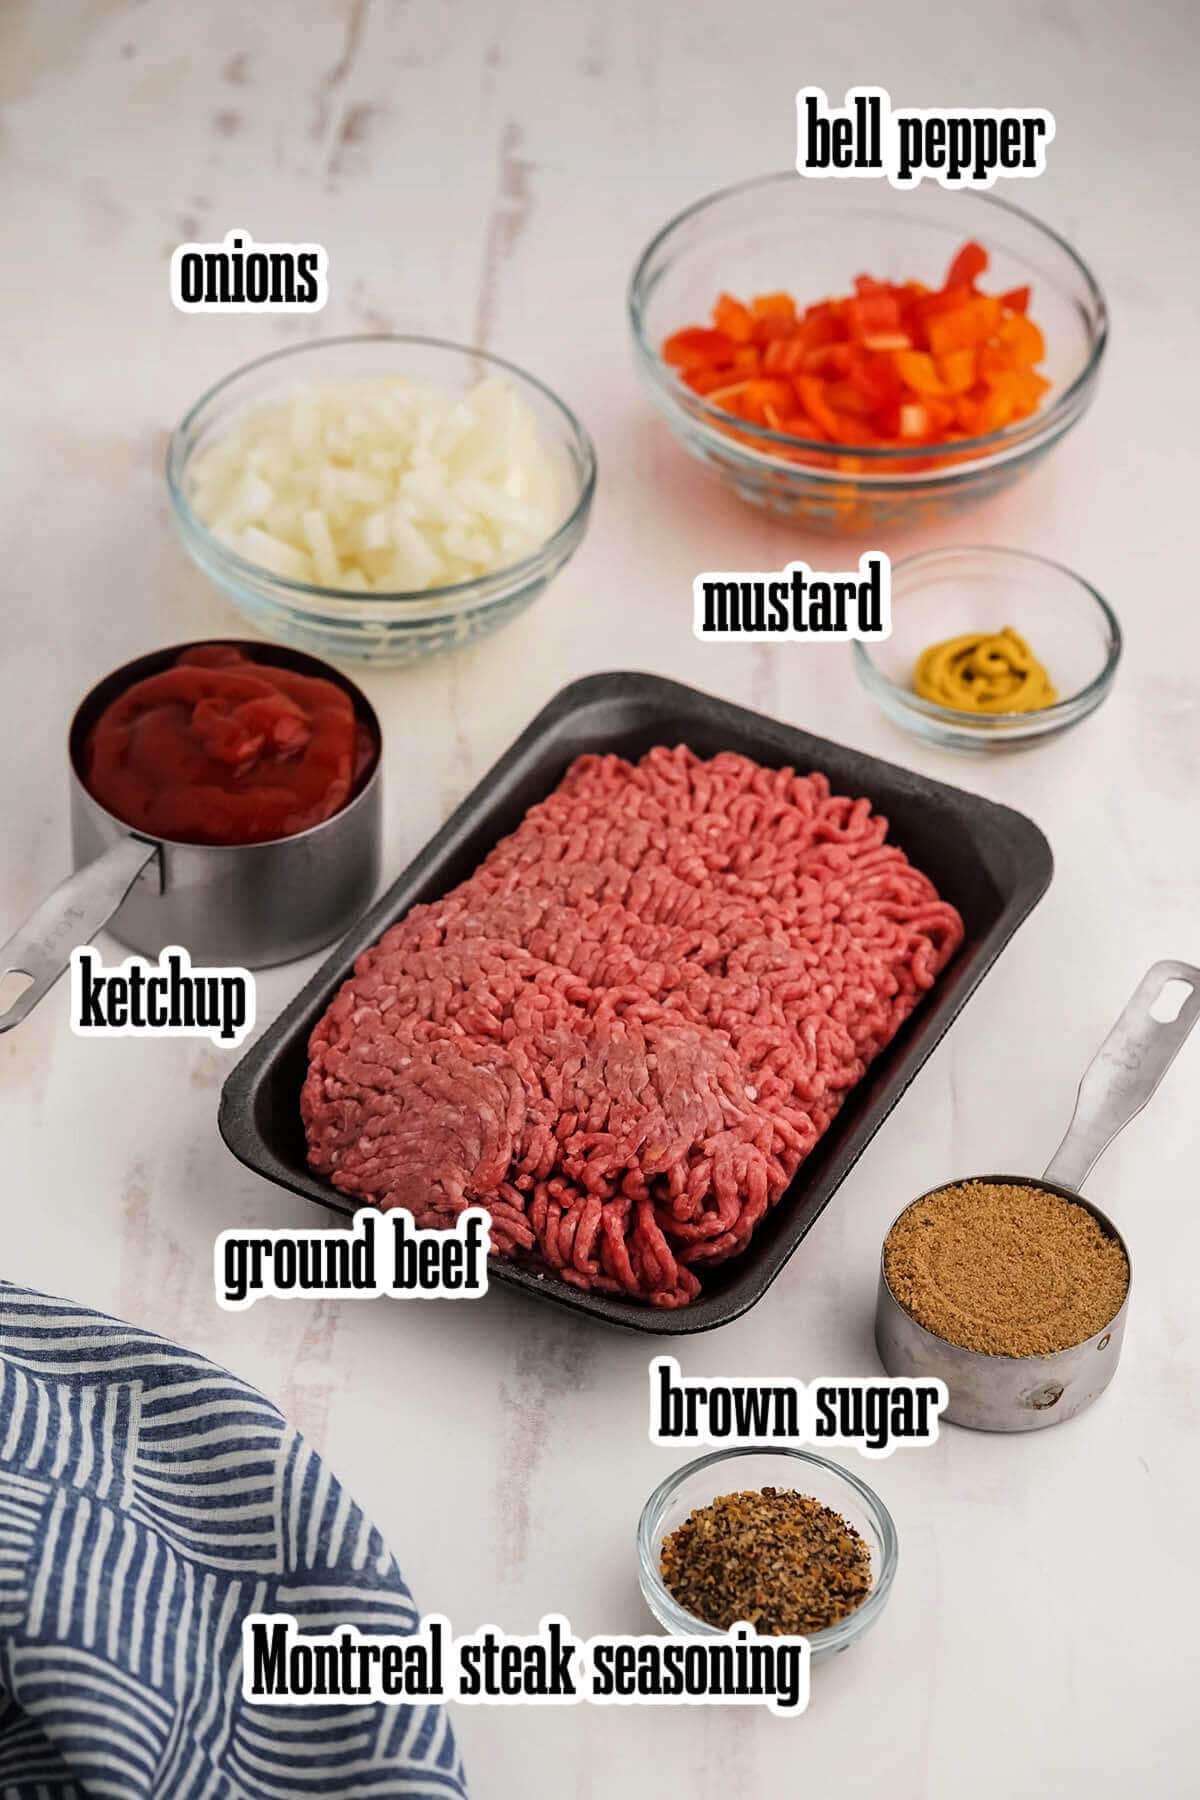 Ingredients needed to make this recipe, with print overlay.